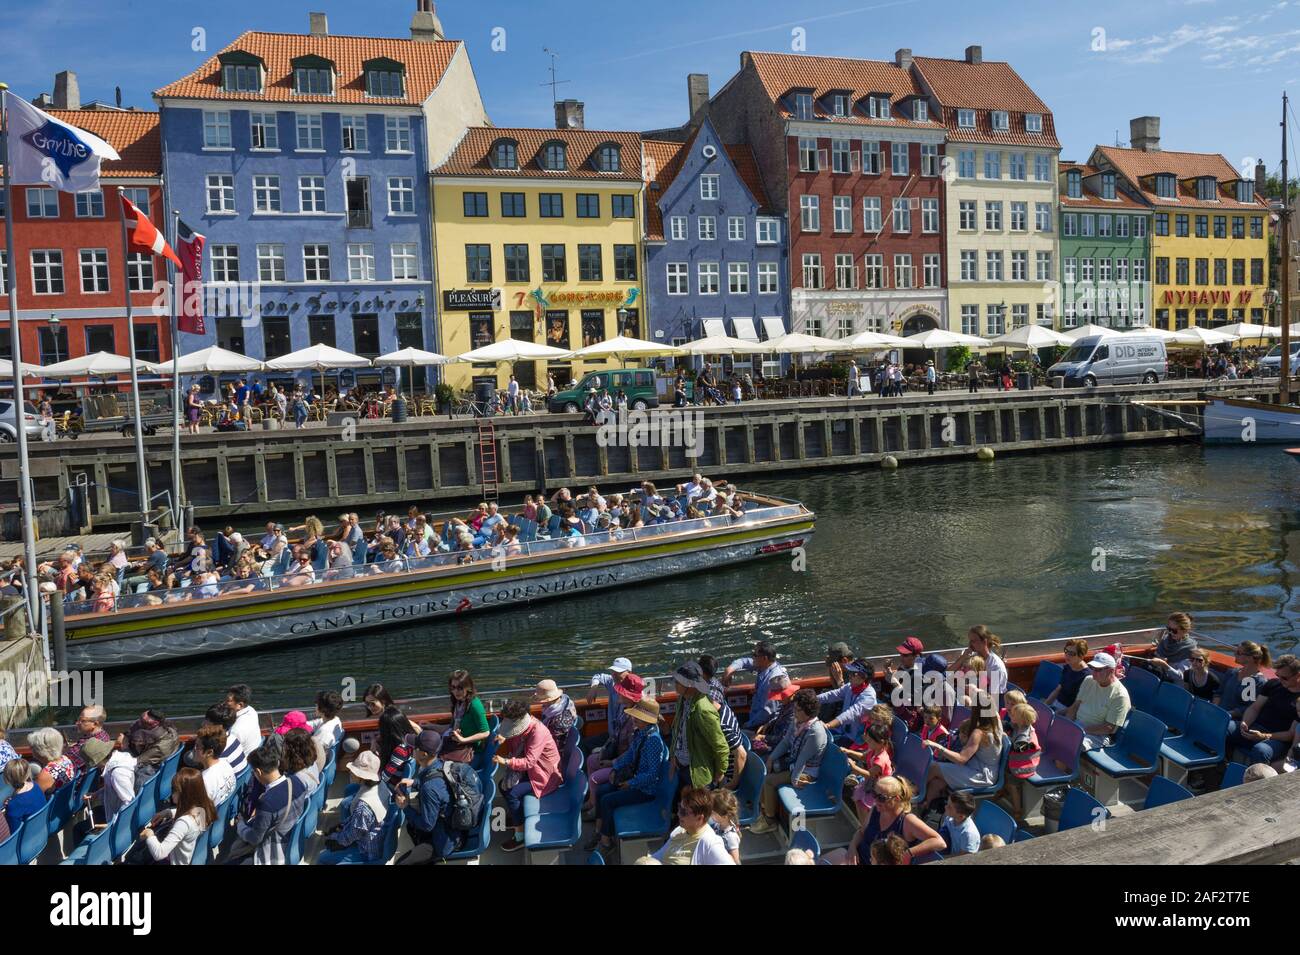 Tourists in boats on the Canal in Copenhagen, Denmark Stock Photo